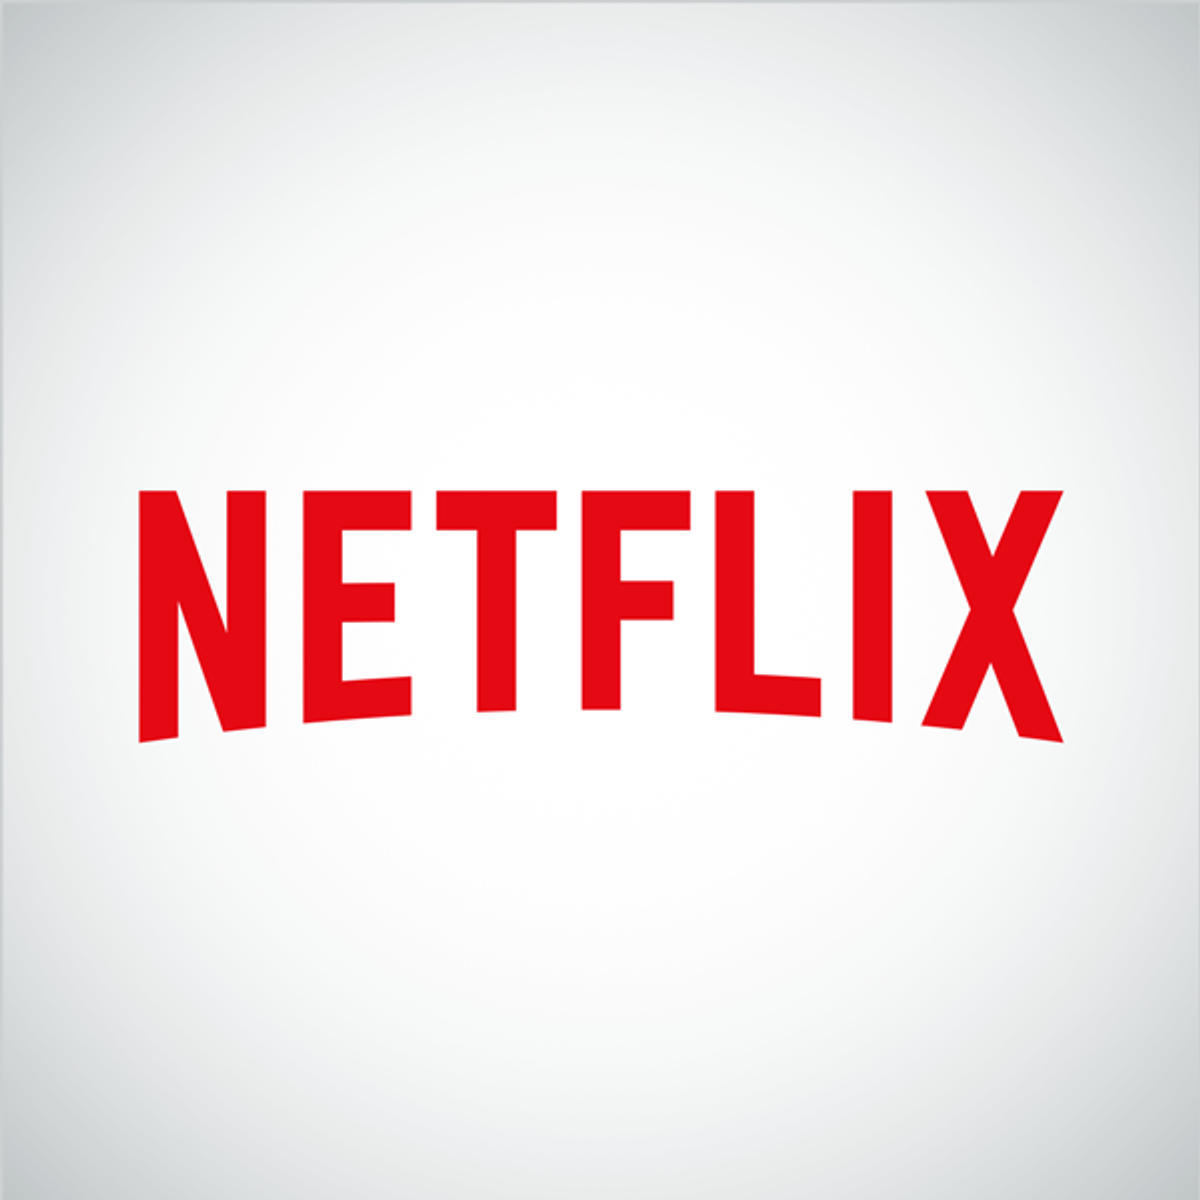 With Everything Going On, Enjoy Some Netflix